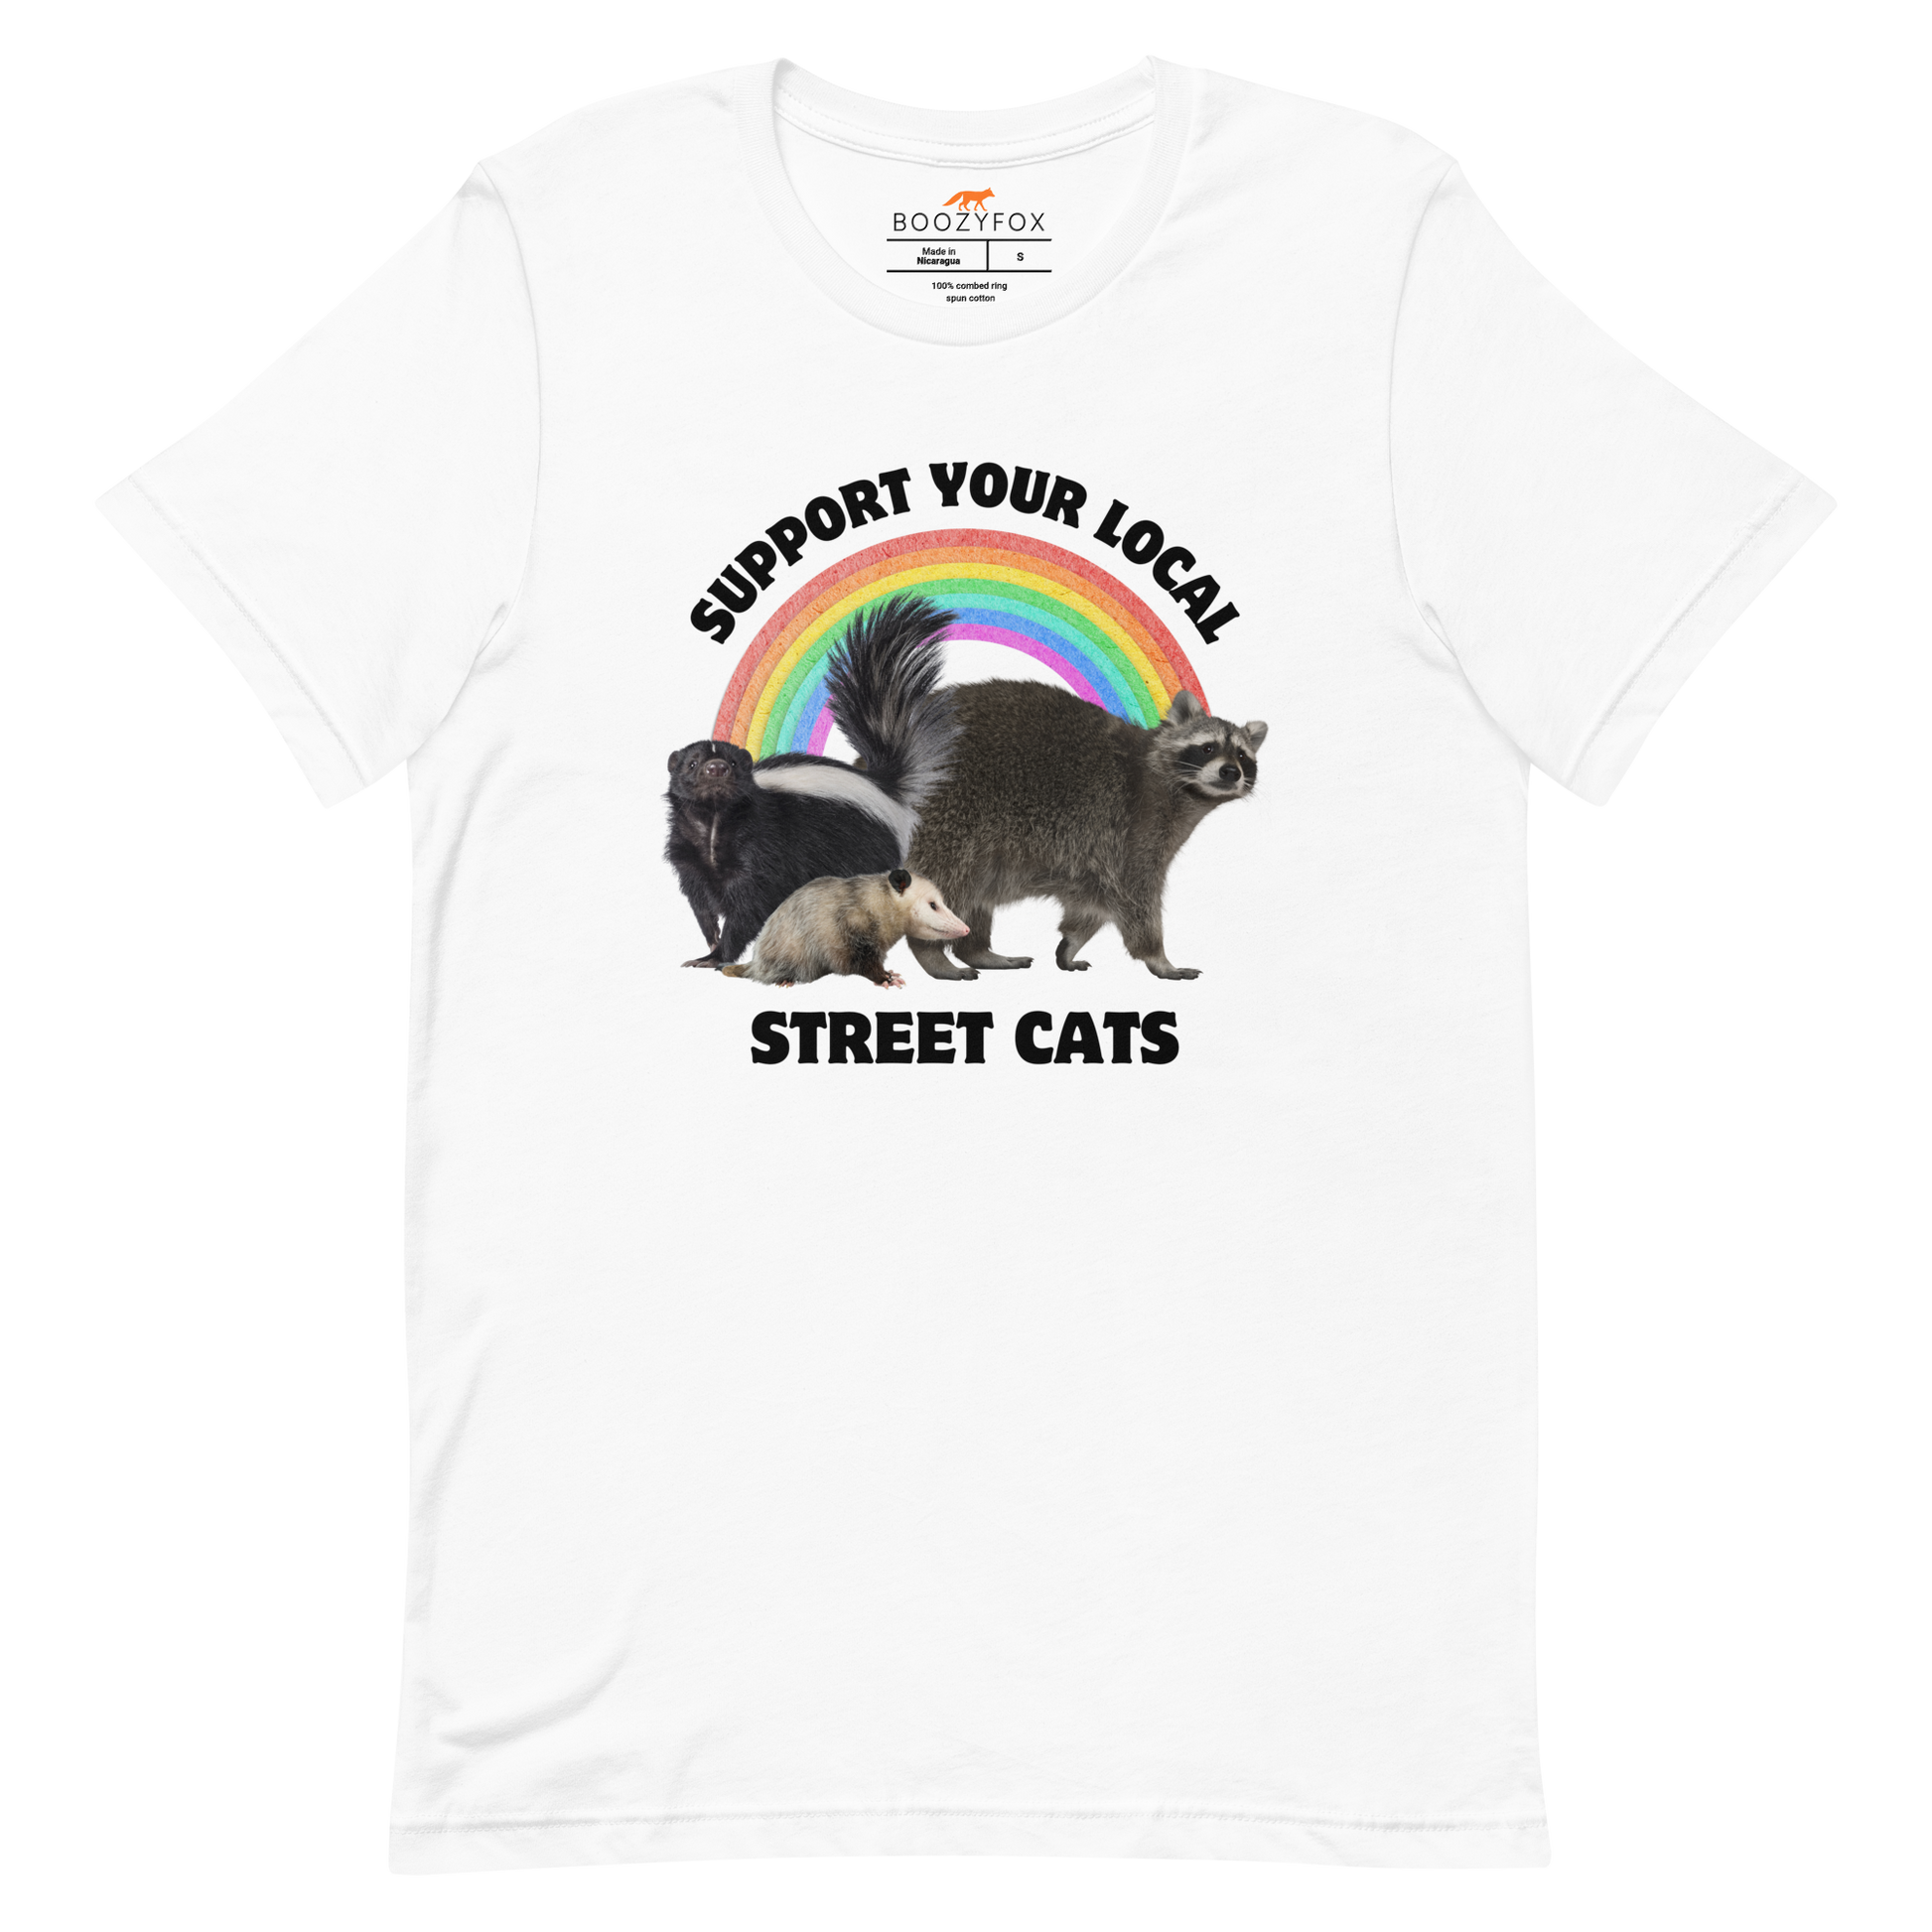 White Premium Street Cats Tee featuring a funny 'Support Your Local Street Cats' graphic on the chest - Funny Graphic Animal Tees - Boozy Fox